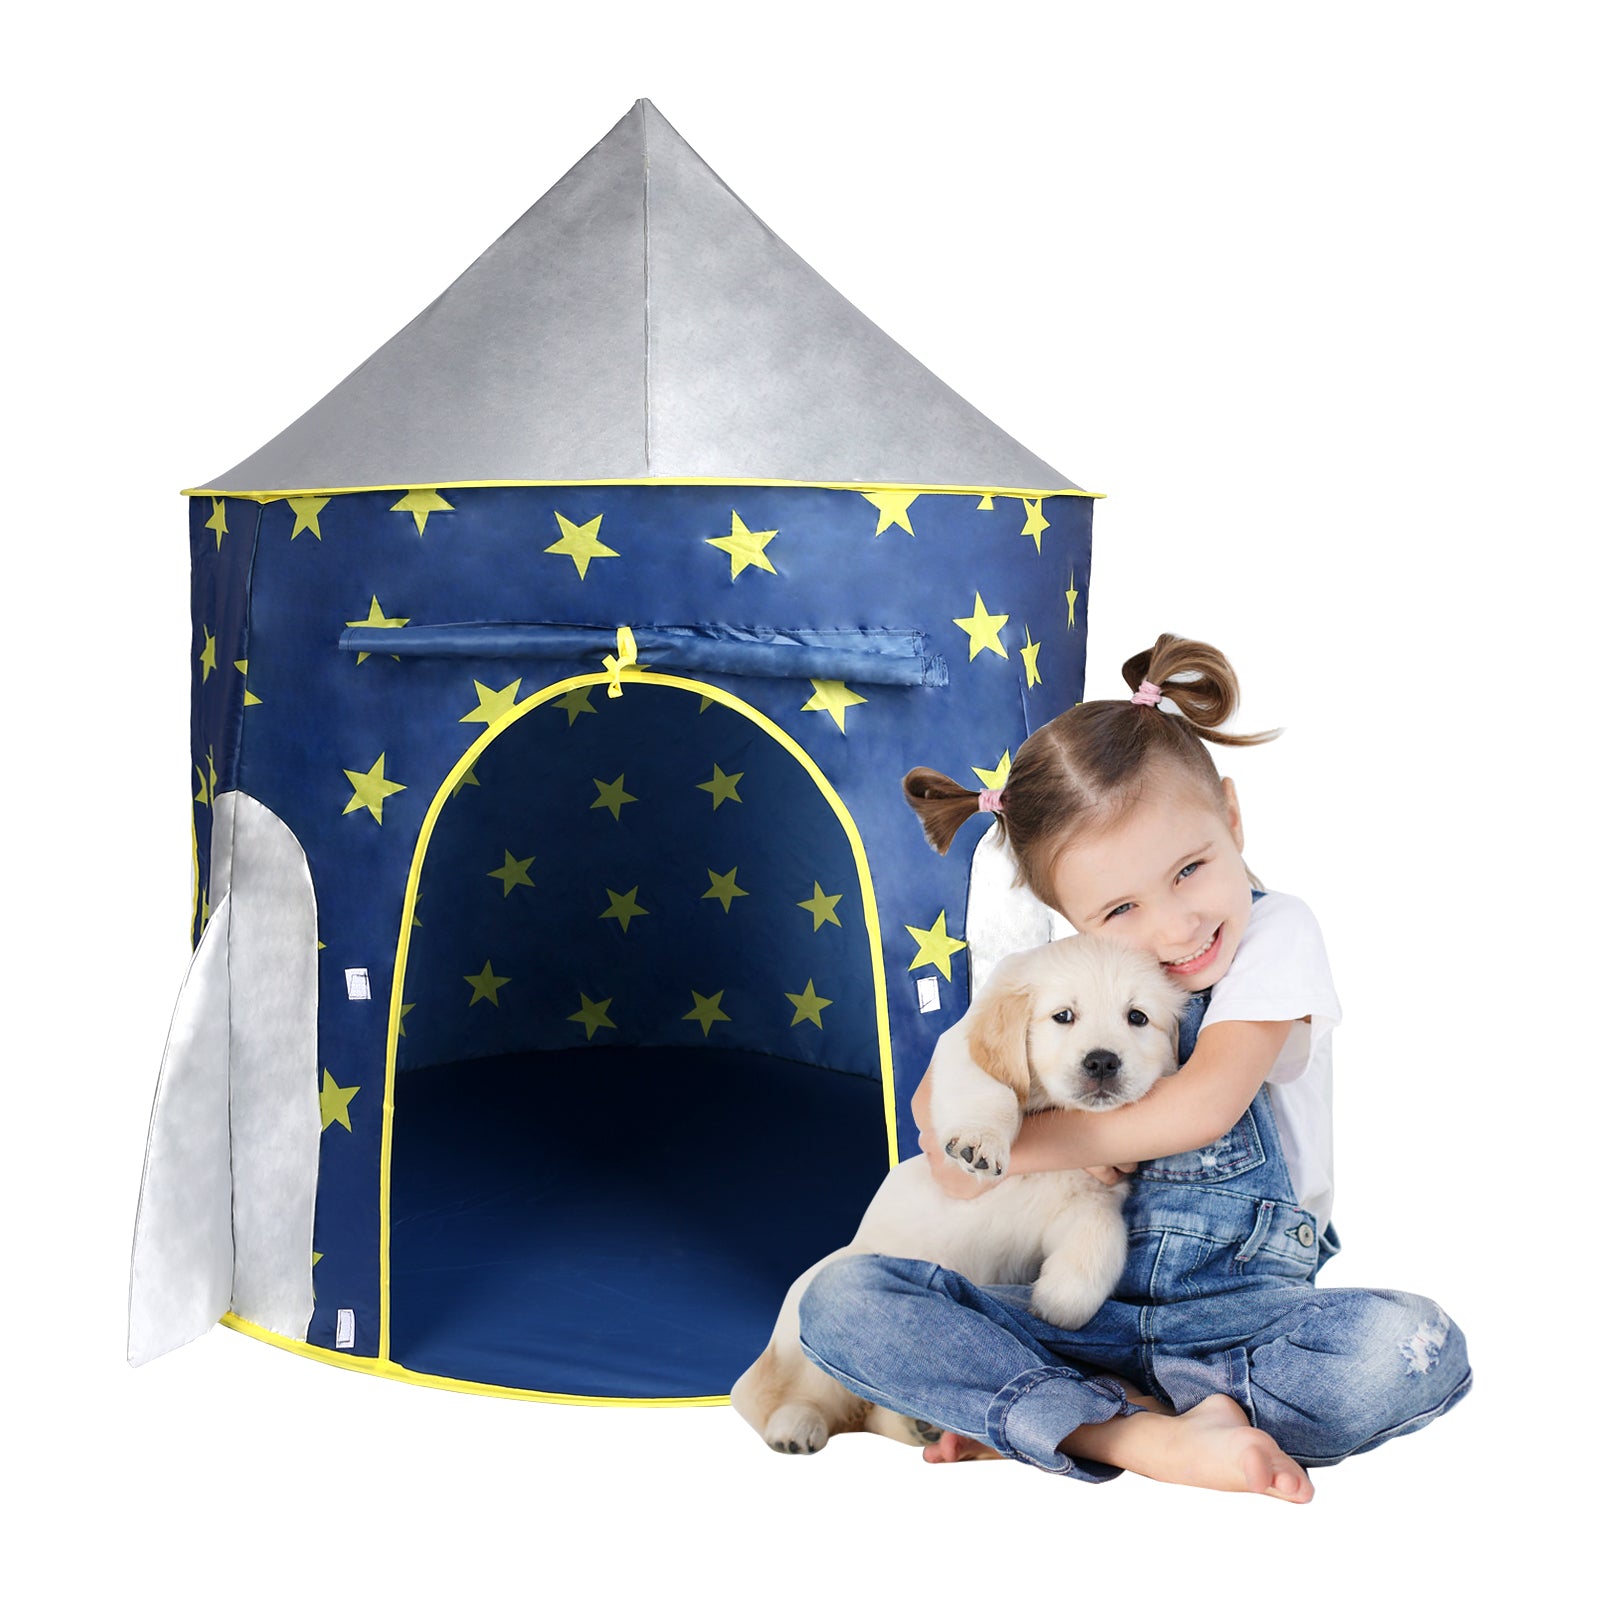 Kids Tent Rocket Spaceship, Kids Play Tent, Unicorn Tent for Boys & Girls, Kids Playhouse, Pop up Tents Foldable, Toddler Tent, Gift for Kids, Indoor & Outdoor, Blue, Space Theme - Tonkn